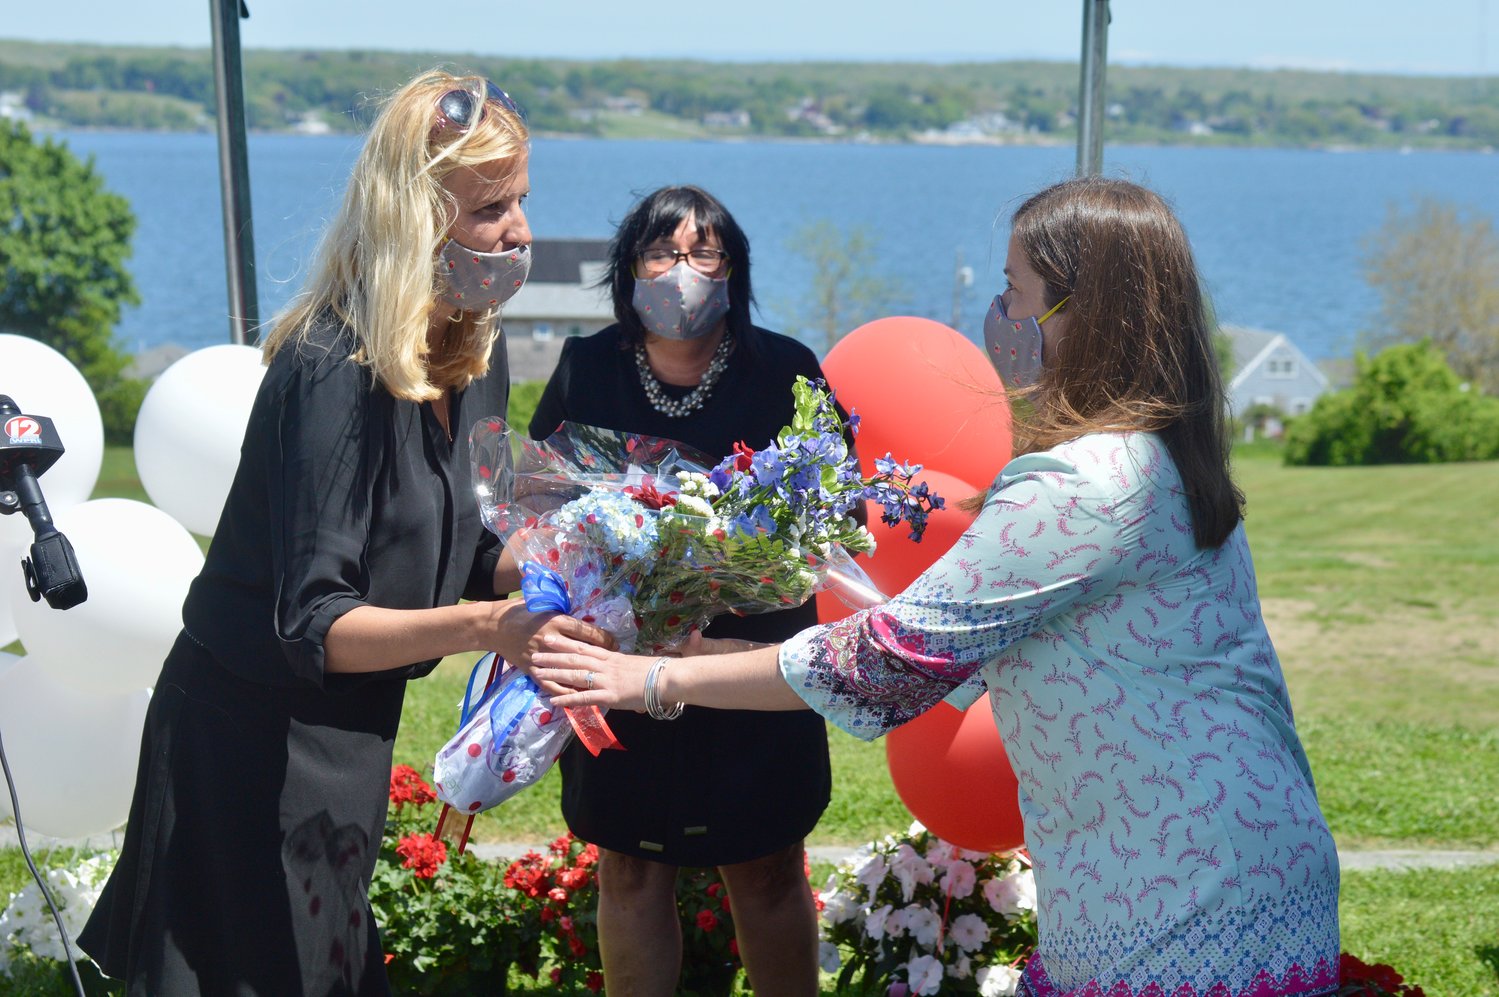 Elizabeth Russillo (left) the 2020 Rhode Island Teacher of the Year, presents a bouquet of flowers to her successor.